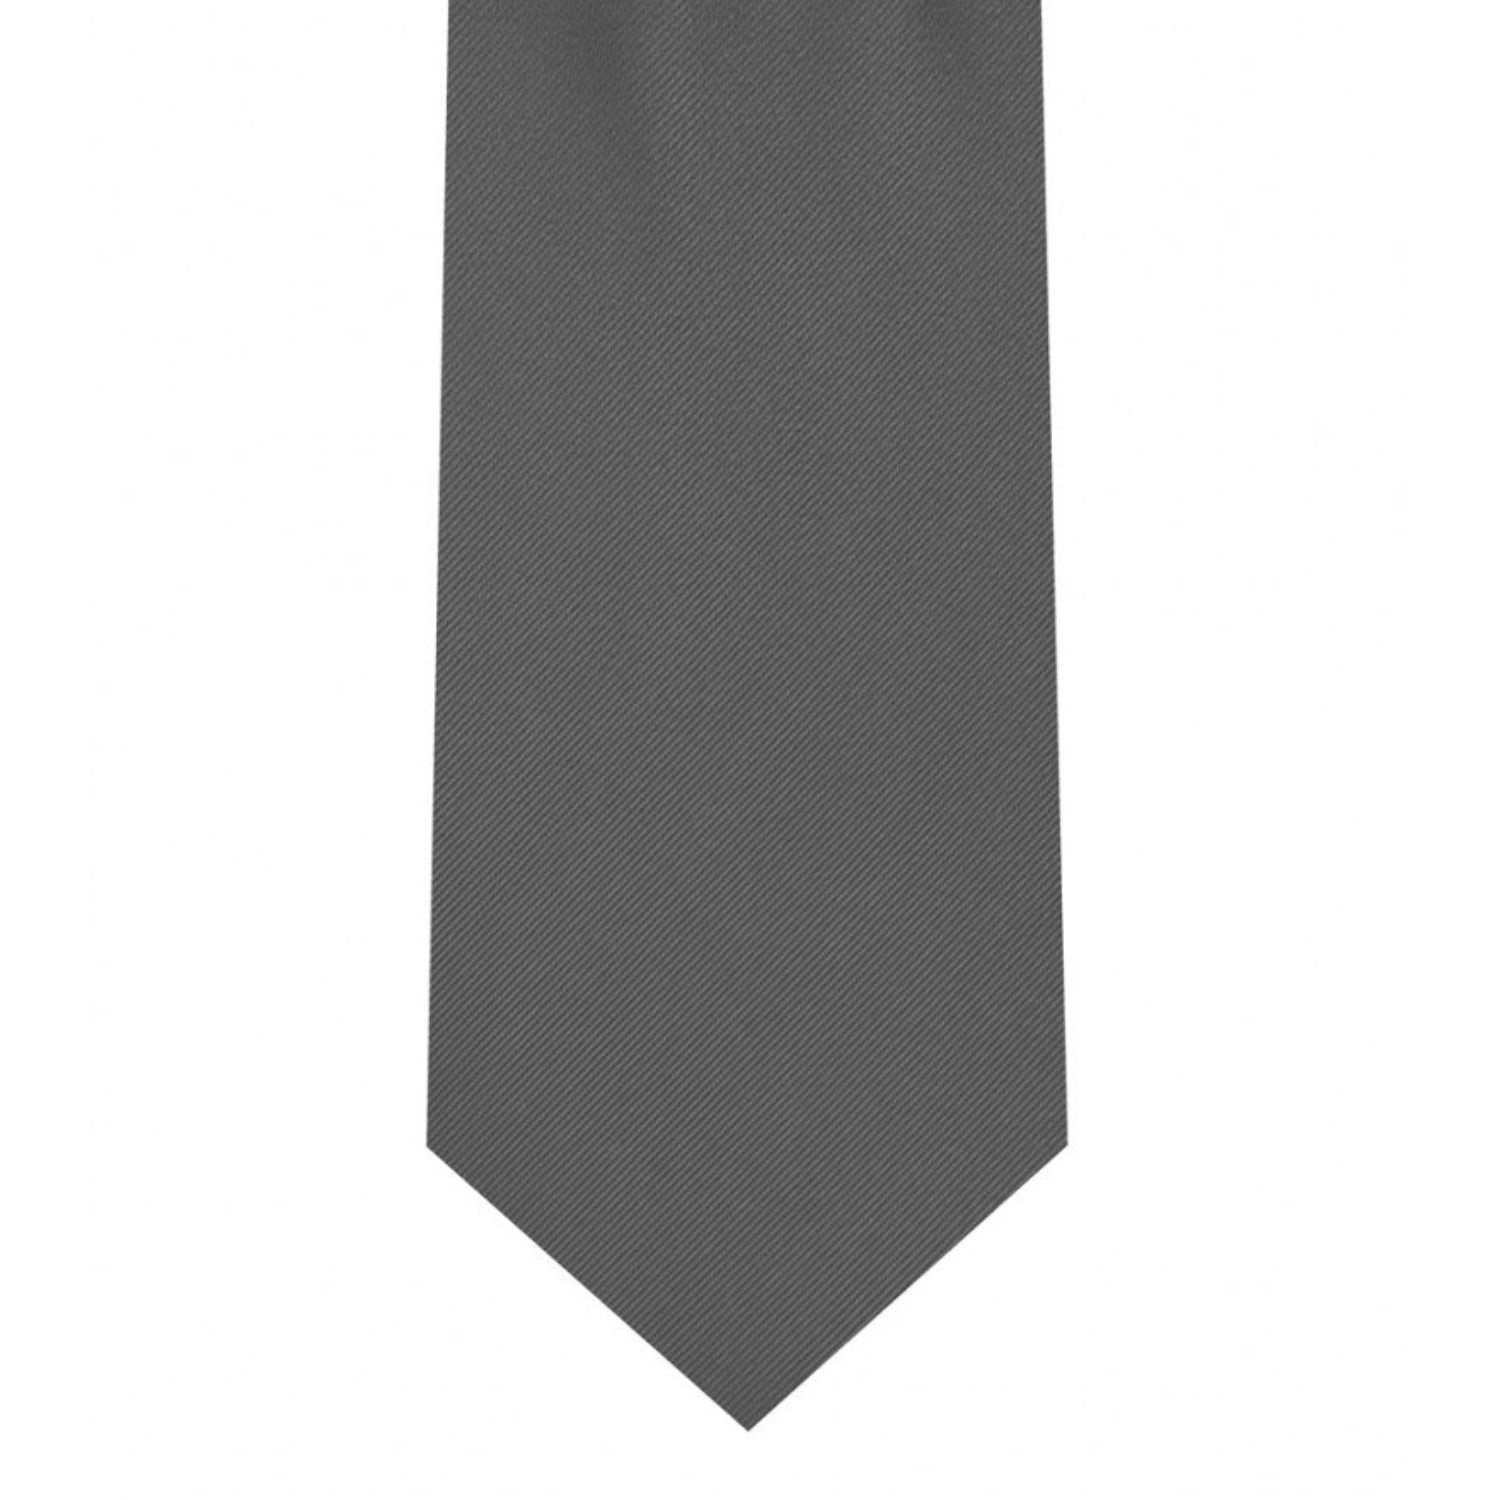 Classic Dark GreyTie Skinny width 2.75 inches With Matching Pocket Square | KCT Menswear 